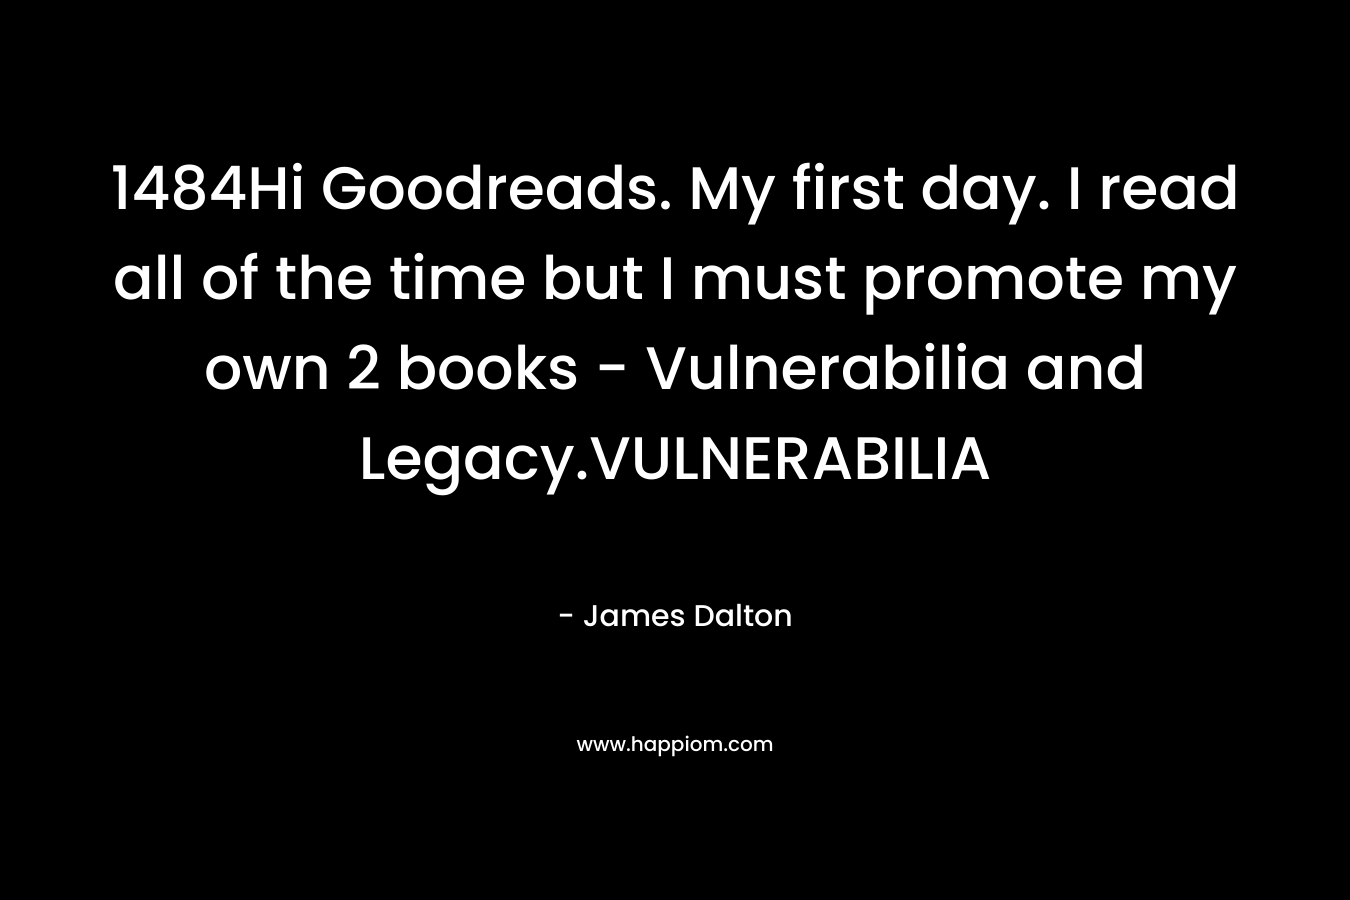 1484Hi Goodreads. My first day. I read all of the time but I must promote my own 2 books - Vulnerabilia and Legacy.VULNERABILIA